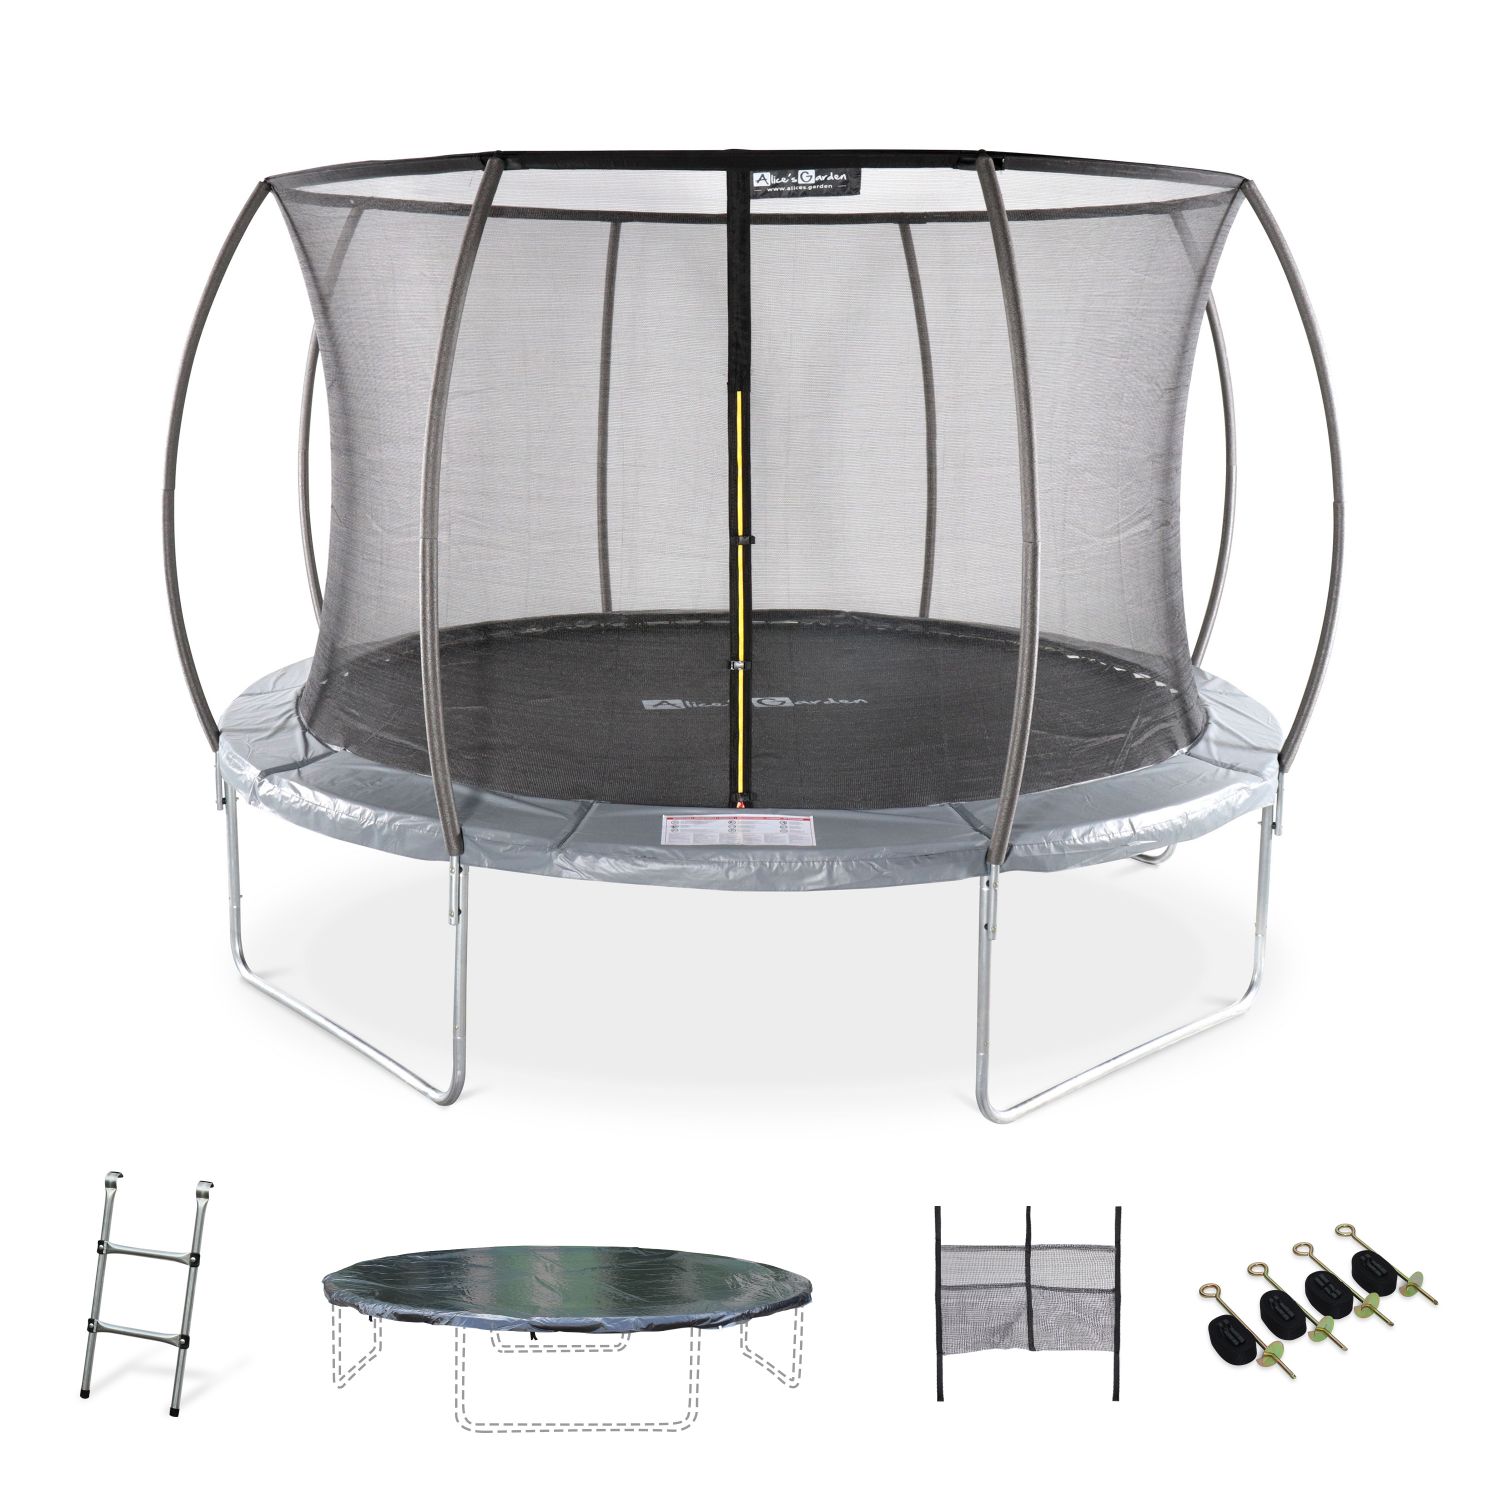 12FT TRAMPOLINE WITH ACCESSORIES KIT - SATURNE INNER